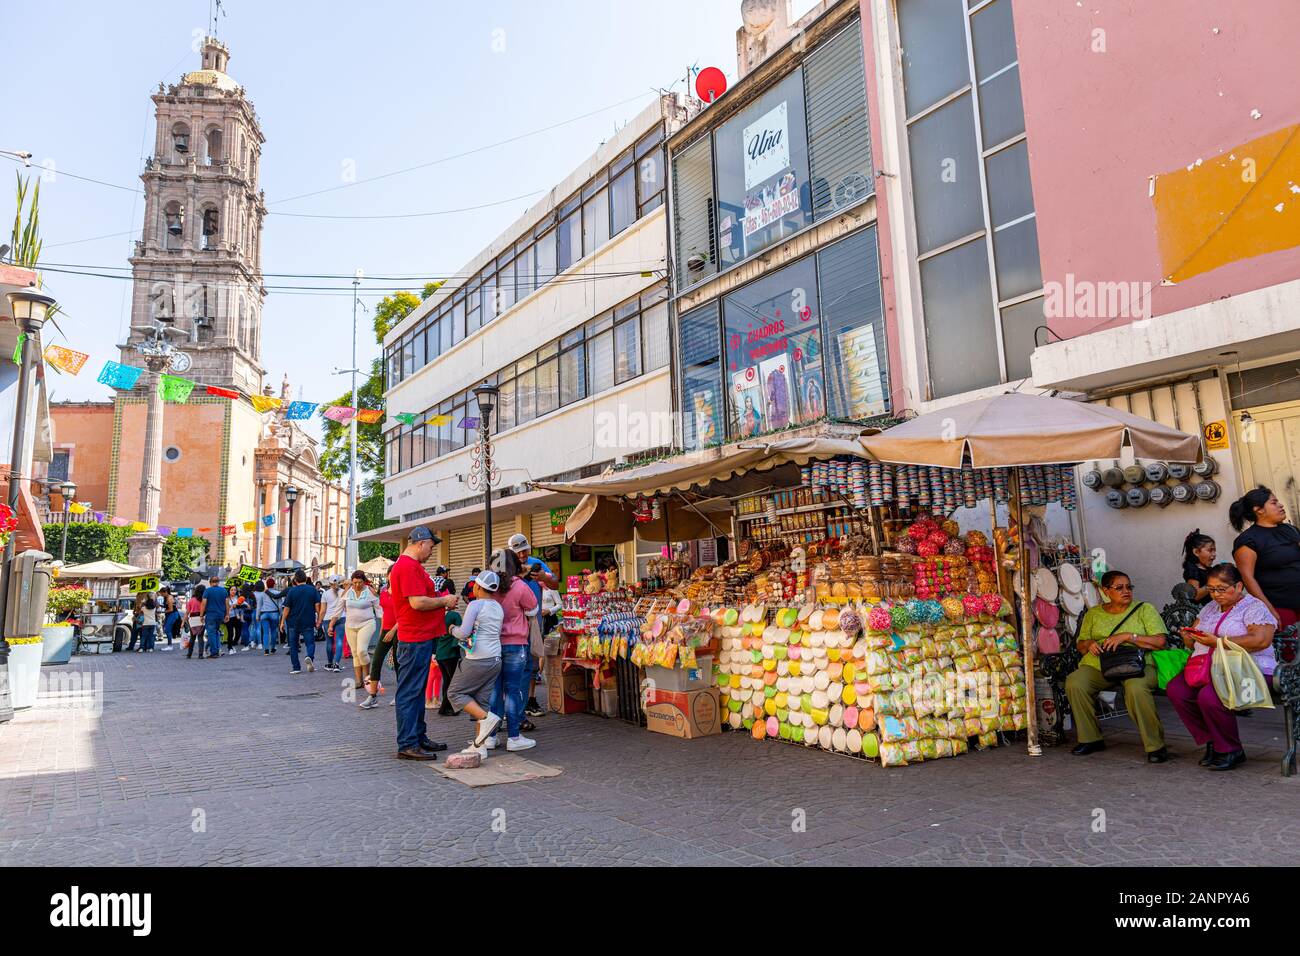 Celaya, Guanajuato, Mexico - November 24, 2019: Tourists and Locals shopping at street market along Gongora St. with the Immaculate Conception Cathedr Stock Photo